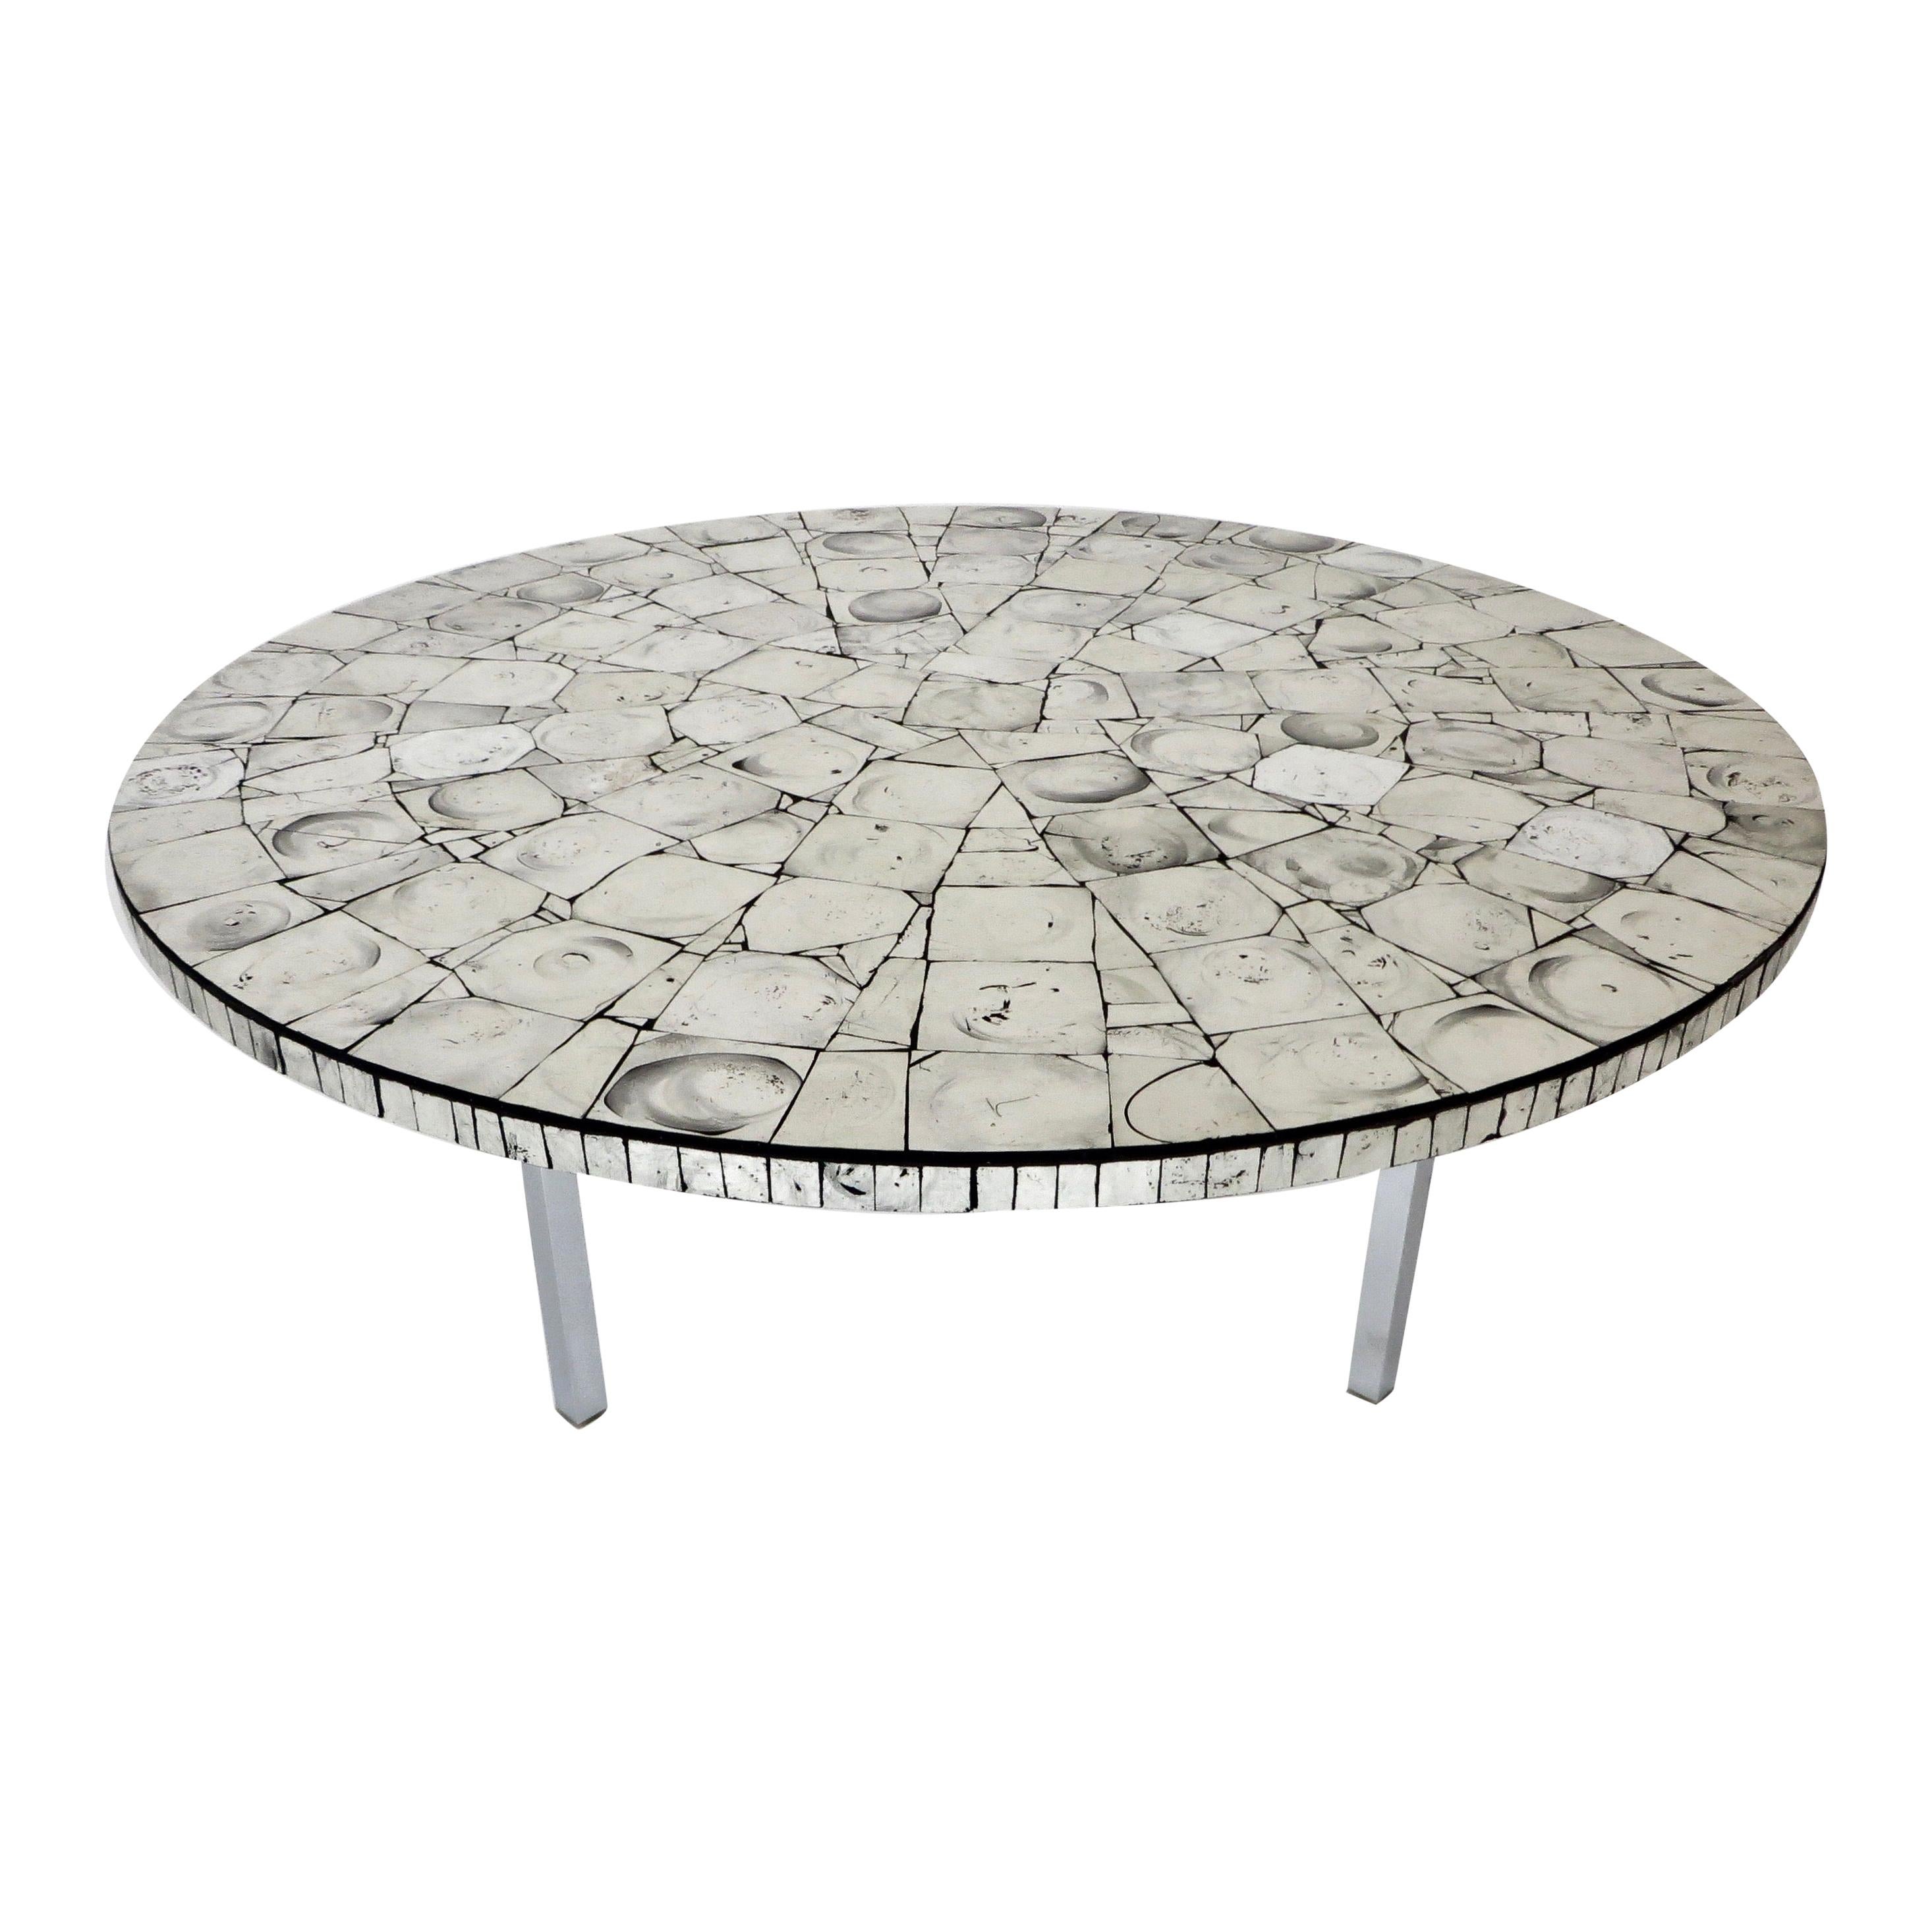 Silver Leafed Glass Mosaic French Round Coffee Table on Chrome Legs